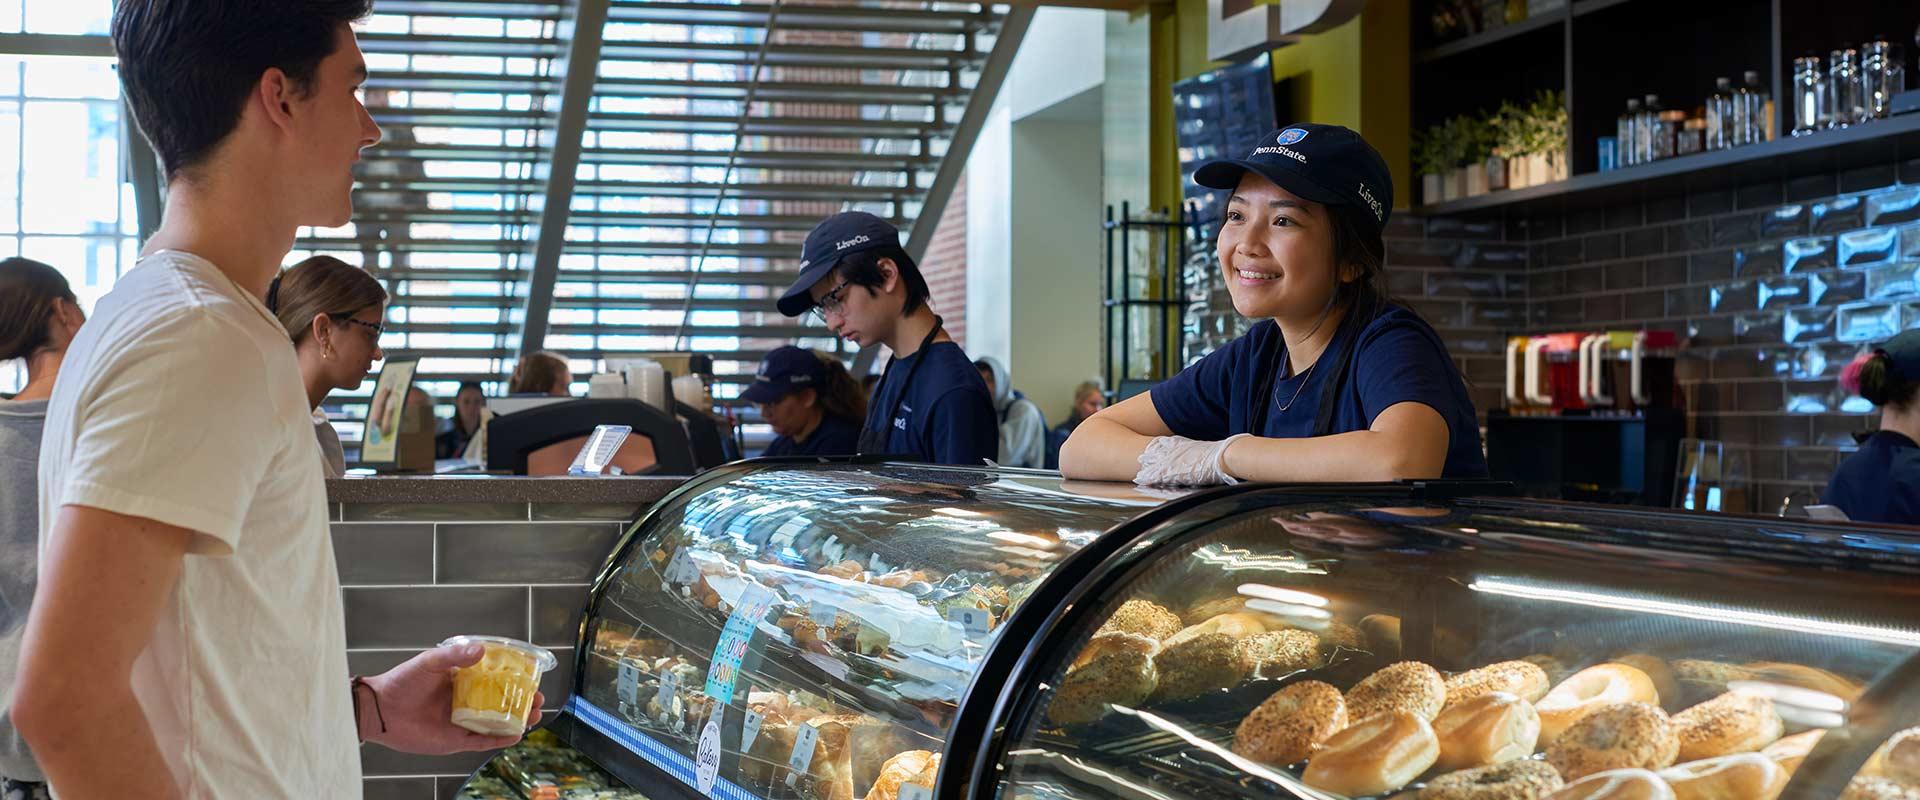 student employee interacts with customer at campus cafe